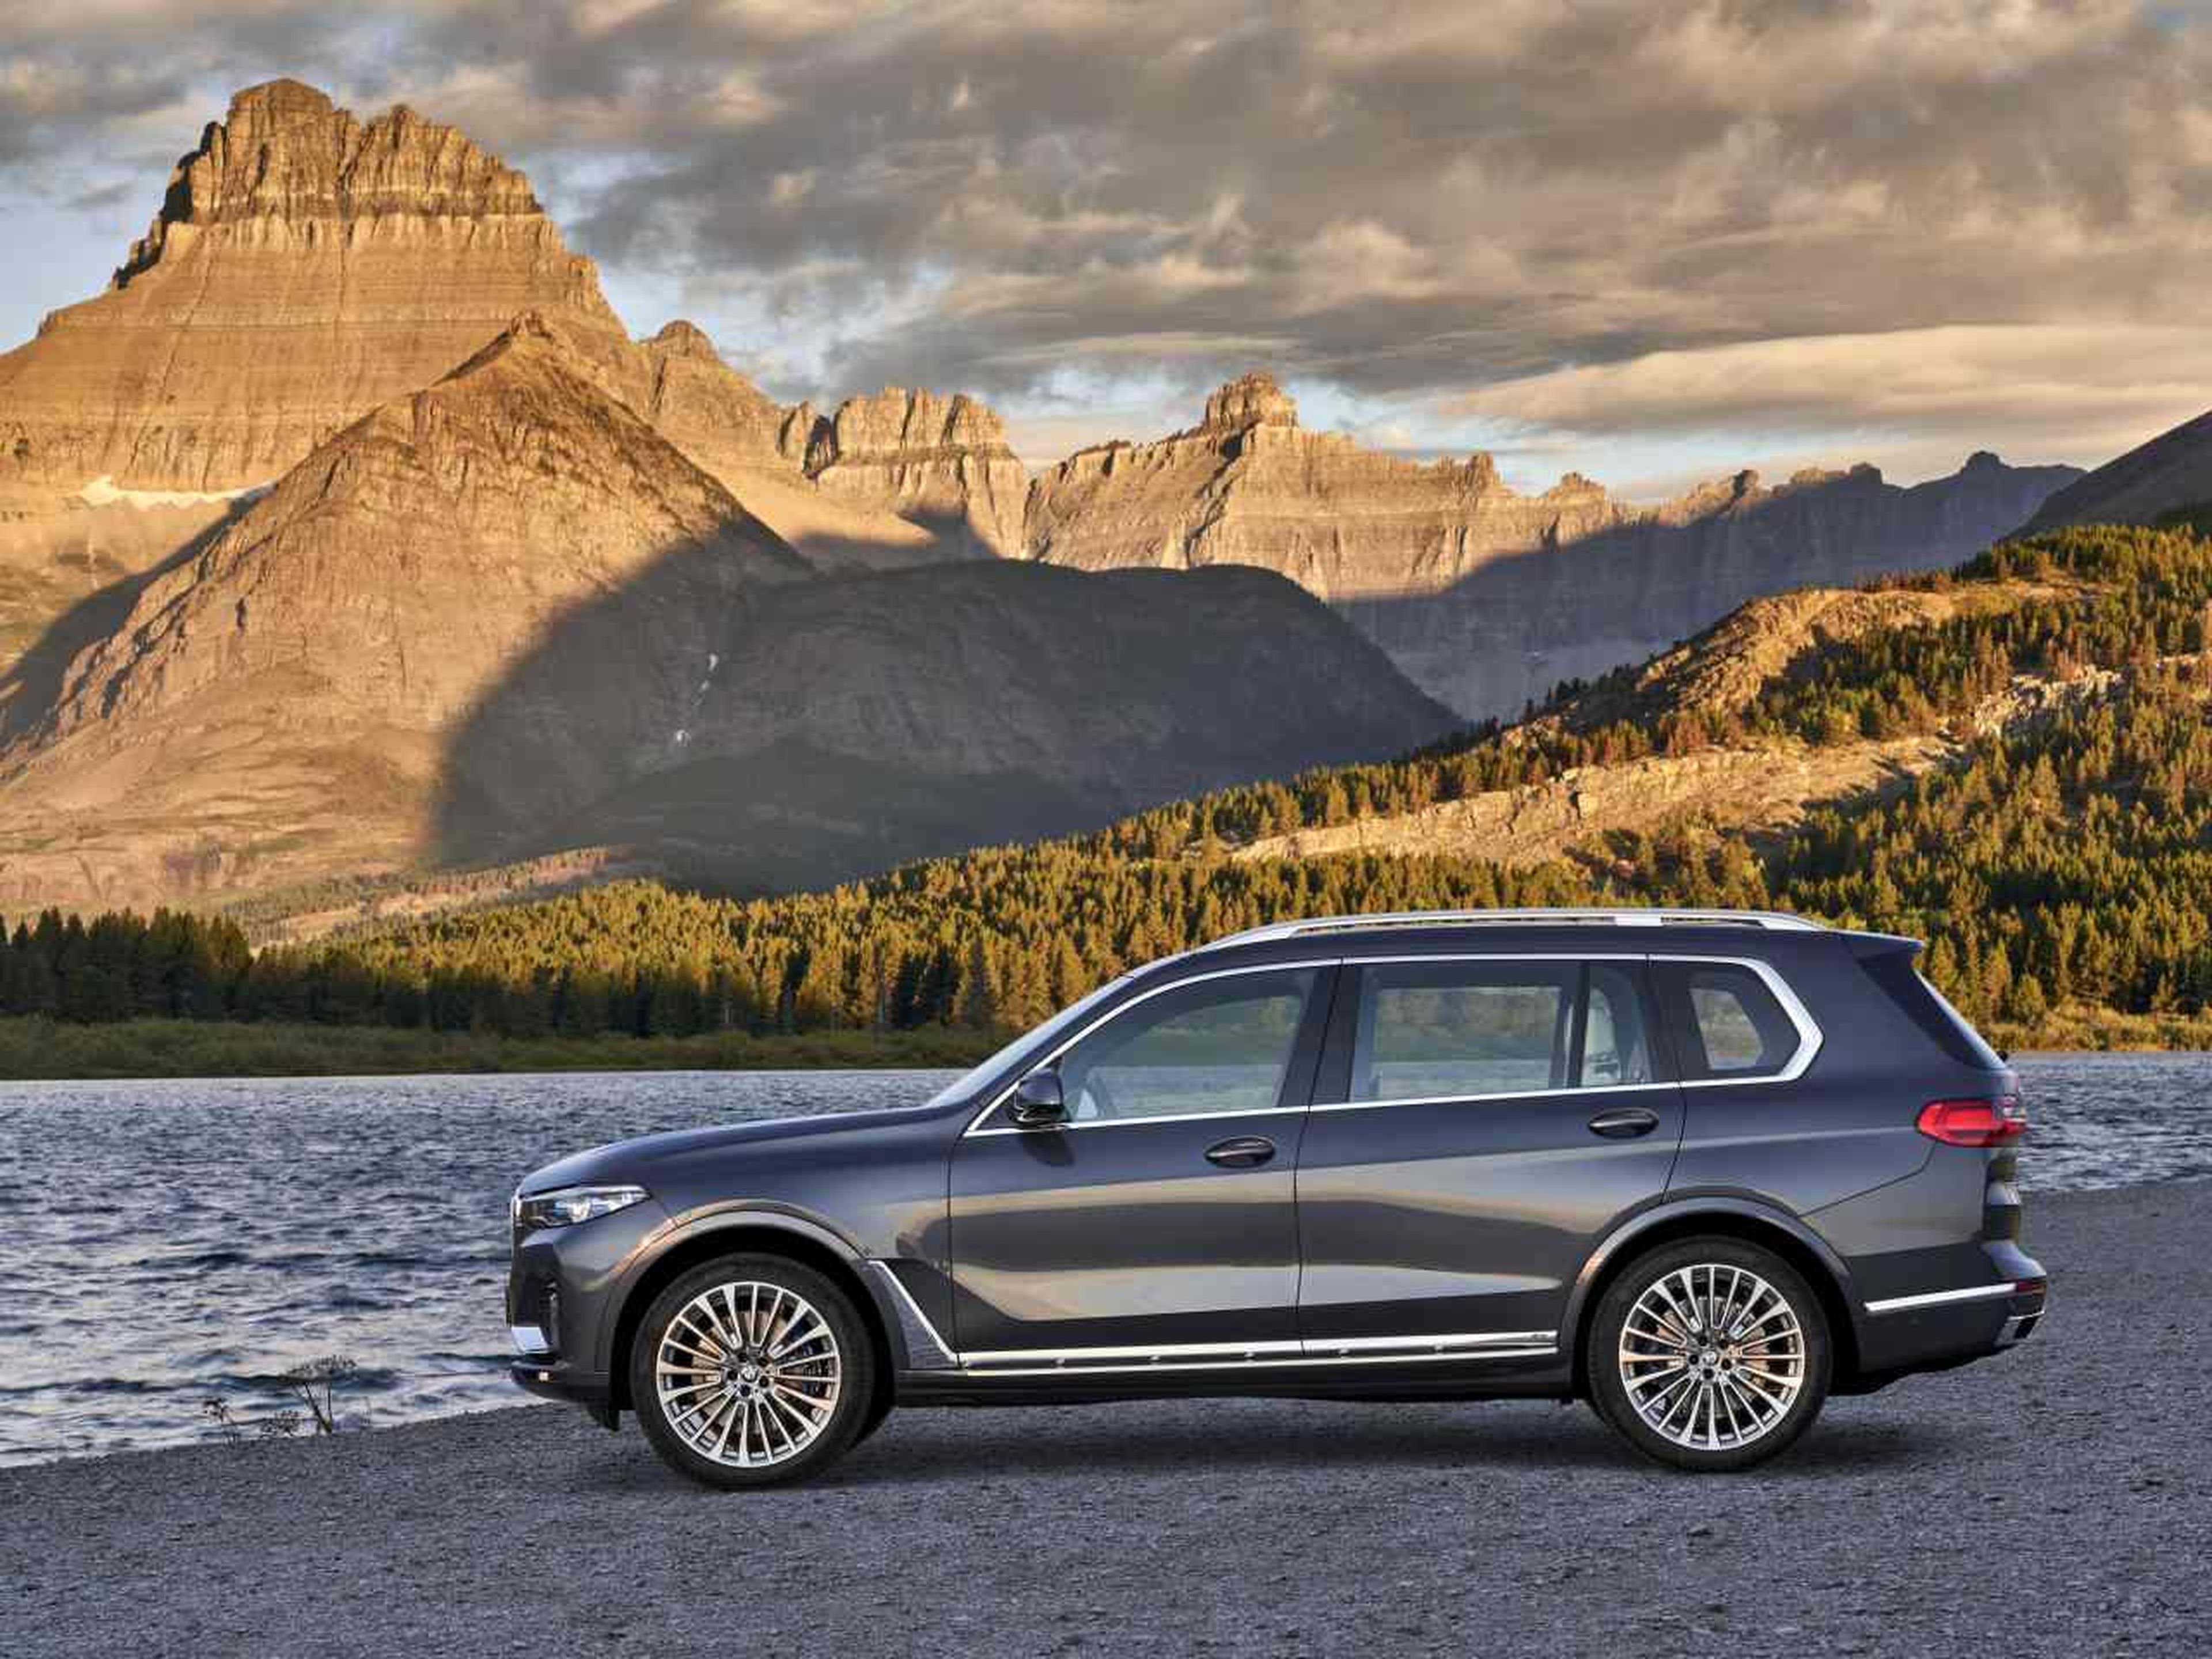 BMW X7 lateral